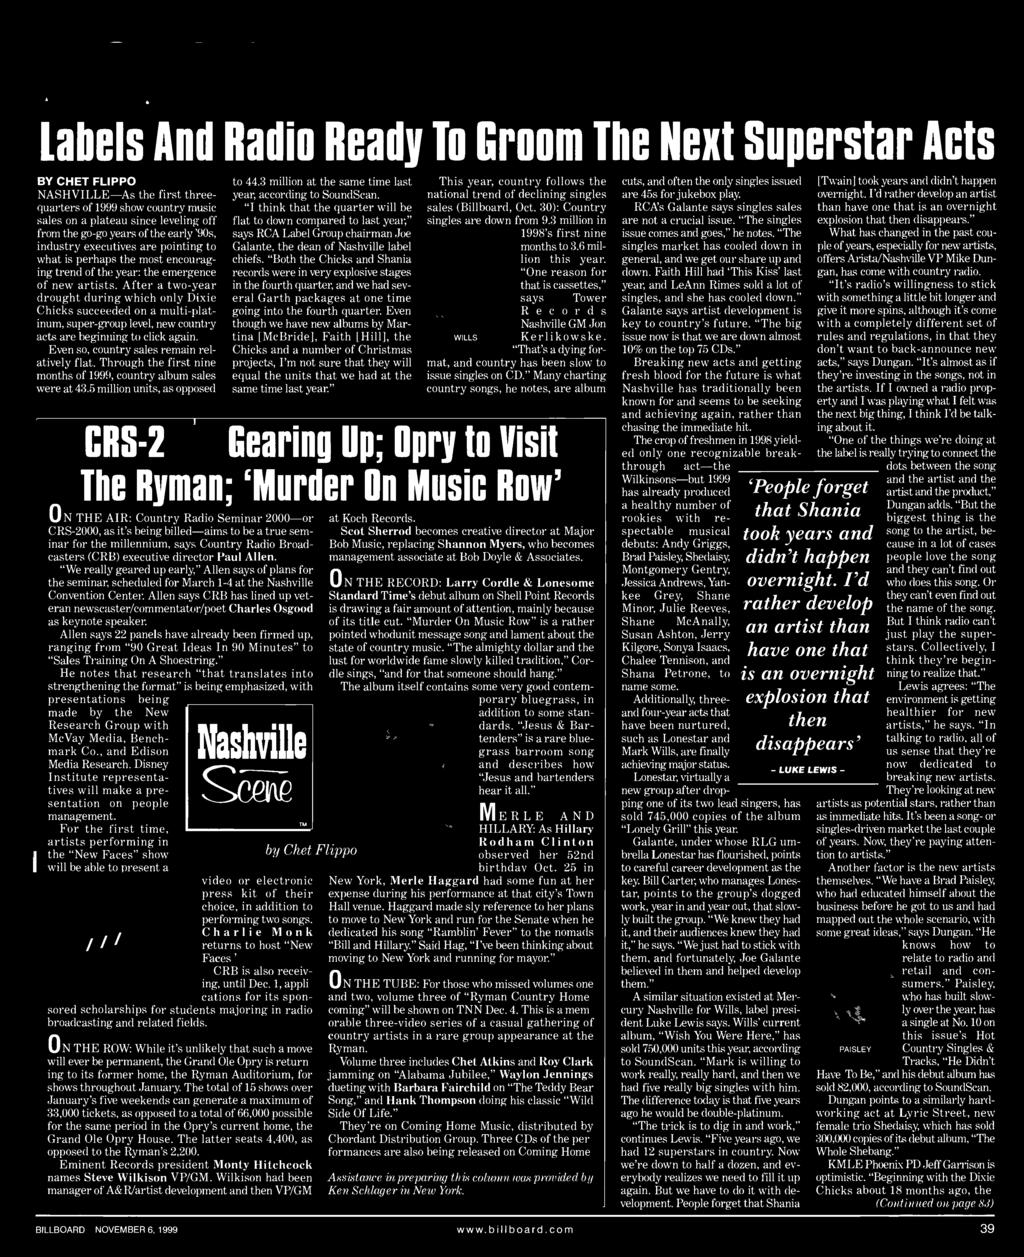 million units, as opposed O N THE AIR: Country Radio Seminar 2000 -or ('RS-2000, as it's being billed -aims to be a true seminar for the millennium, says Country Radio Broadcasters (CRB) executive